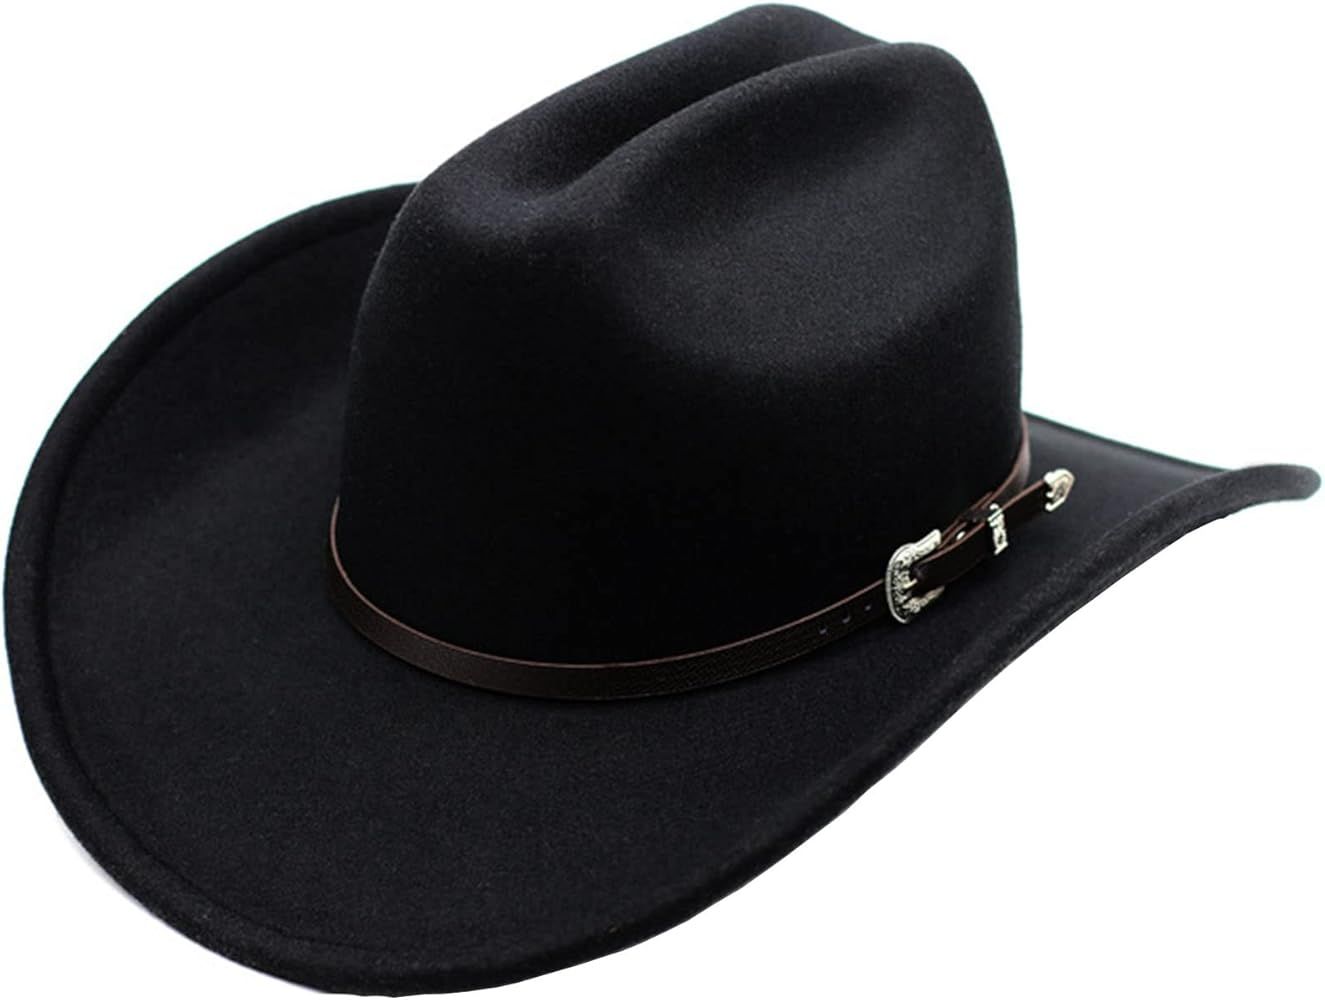 UIMLK Classic Felt Wide Brim Western Cowboy & Cowgirl Hat with Buckle for Women and Men | Amazon (US)